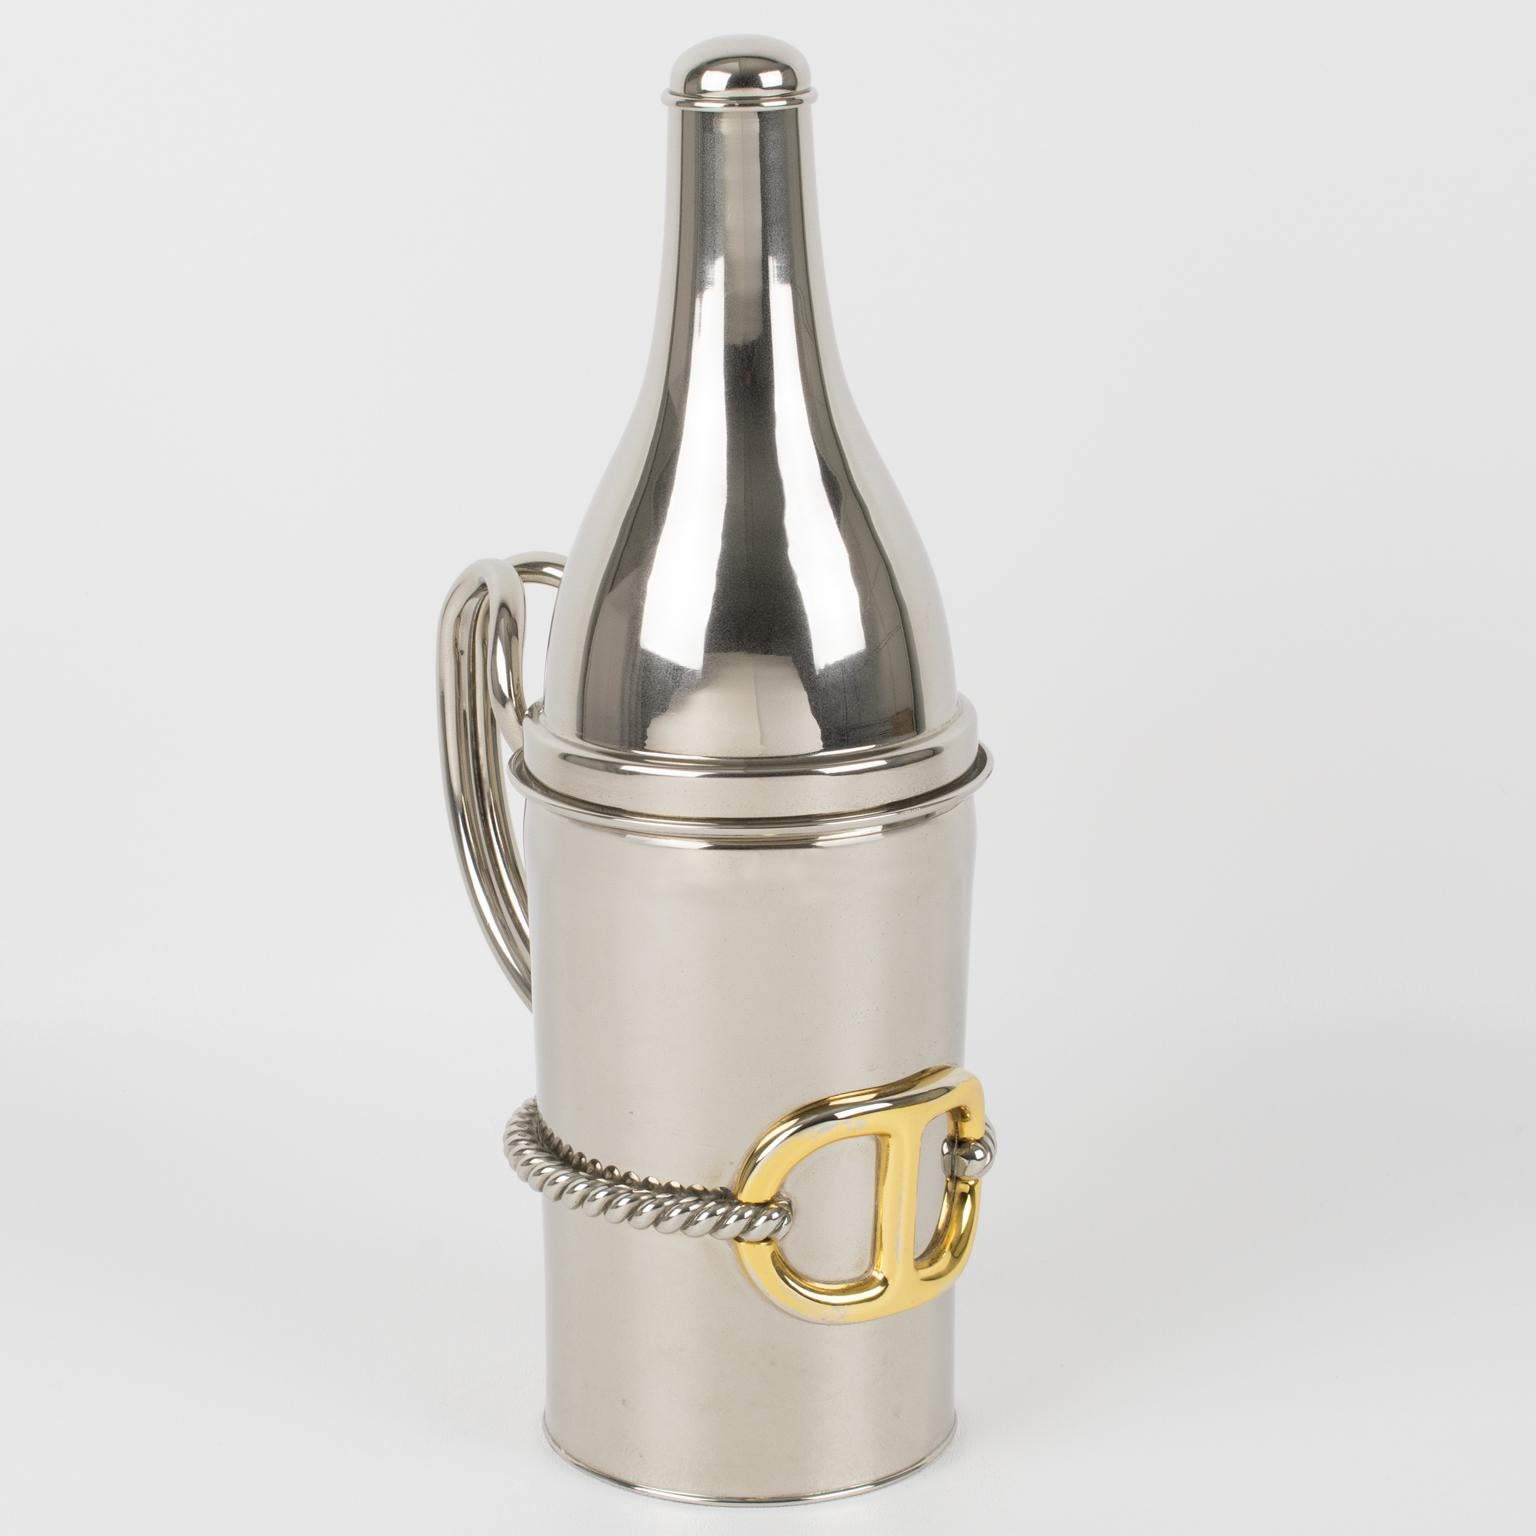 Gucci, Italy, crafted this luxury gold-plated and silvered metal barware bottle holder or bottle decanter in the 1980s. This bar accessory features a sleek and modernist design made from silvered metal. The piece is adorned with a tall